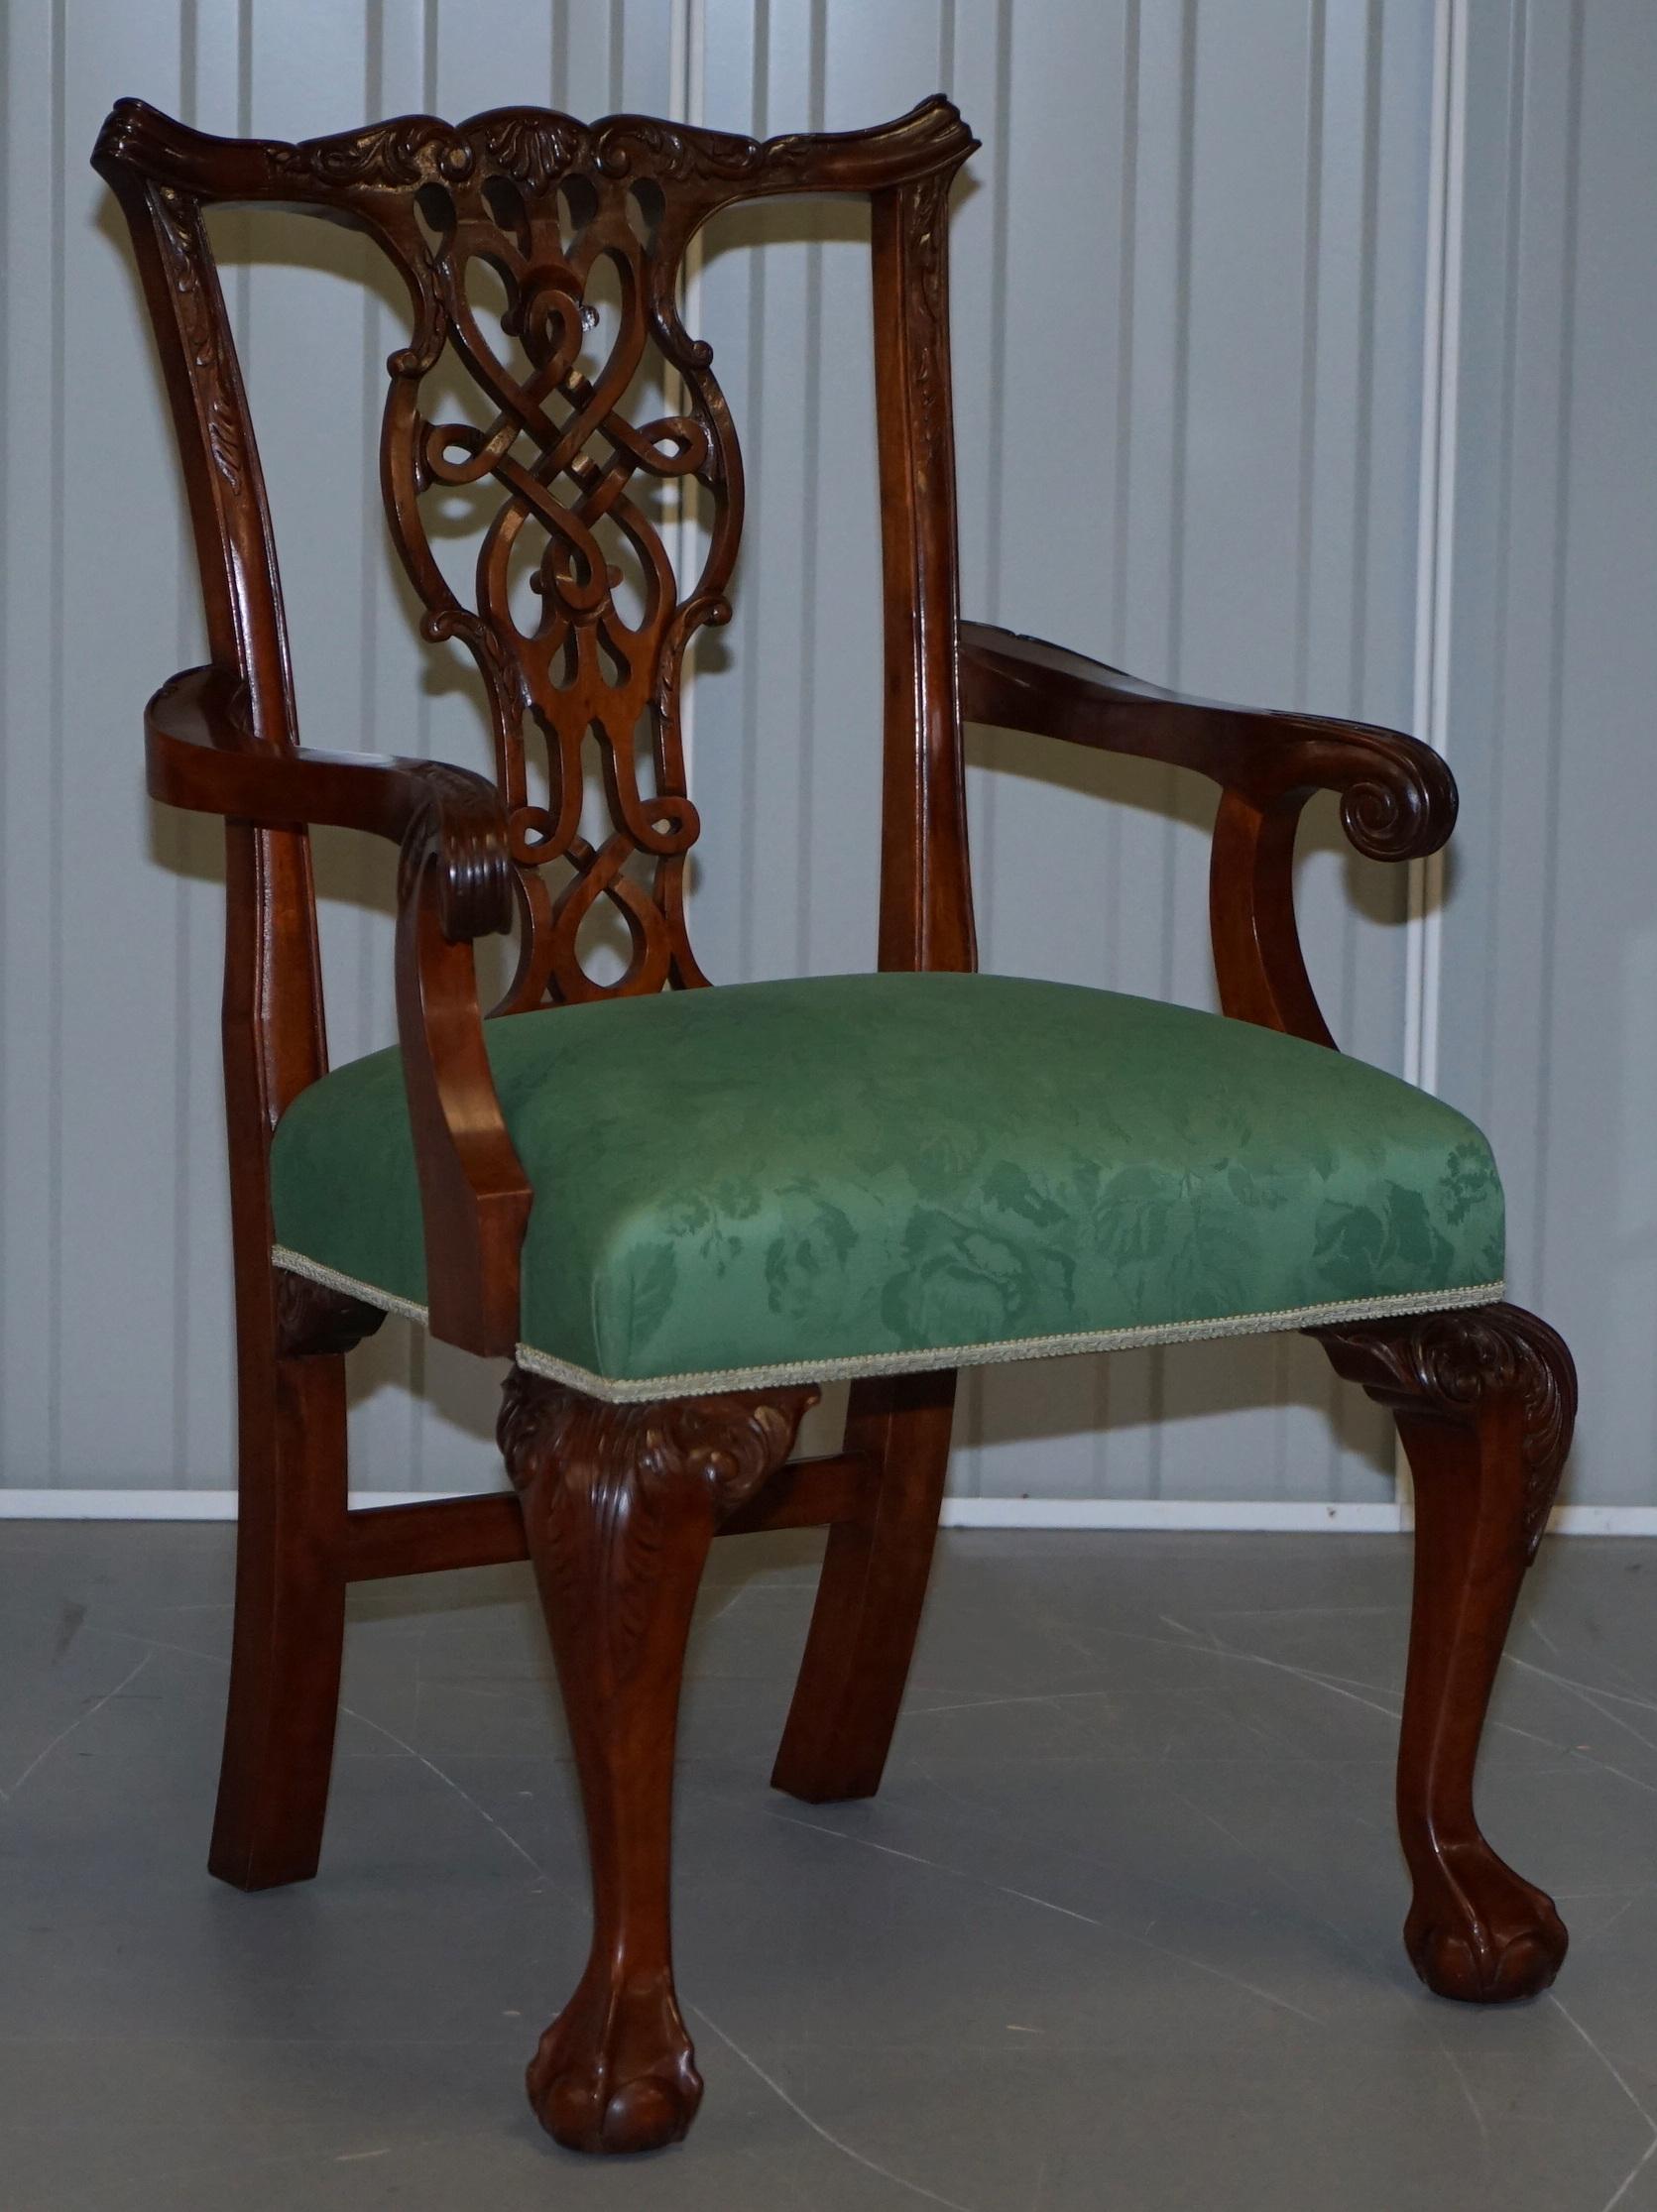 We are delighted to offer for sale this stunning set of twelve vintage claw and ball feet English made from solid mahogany in the Thomas Chippendale style

A very well made and solid set of chairs, they are each quite heavy being made from solid